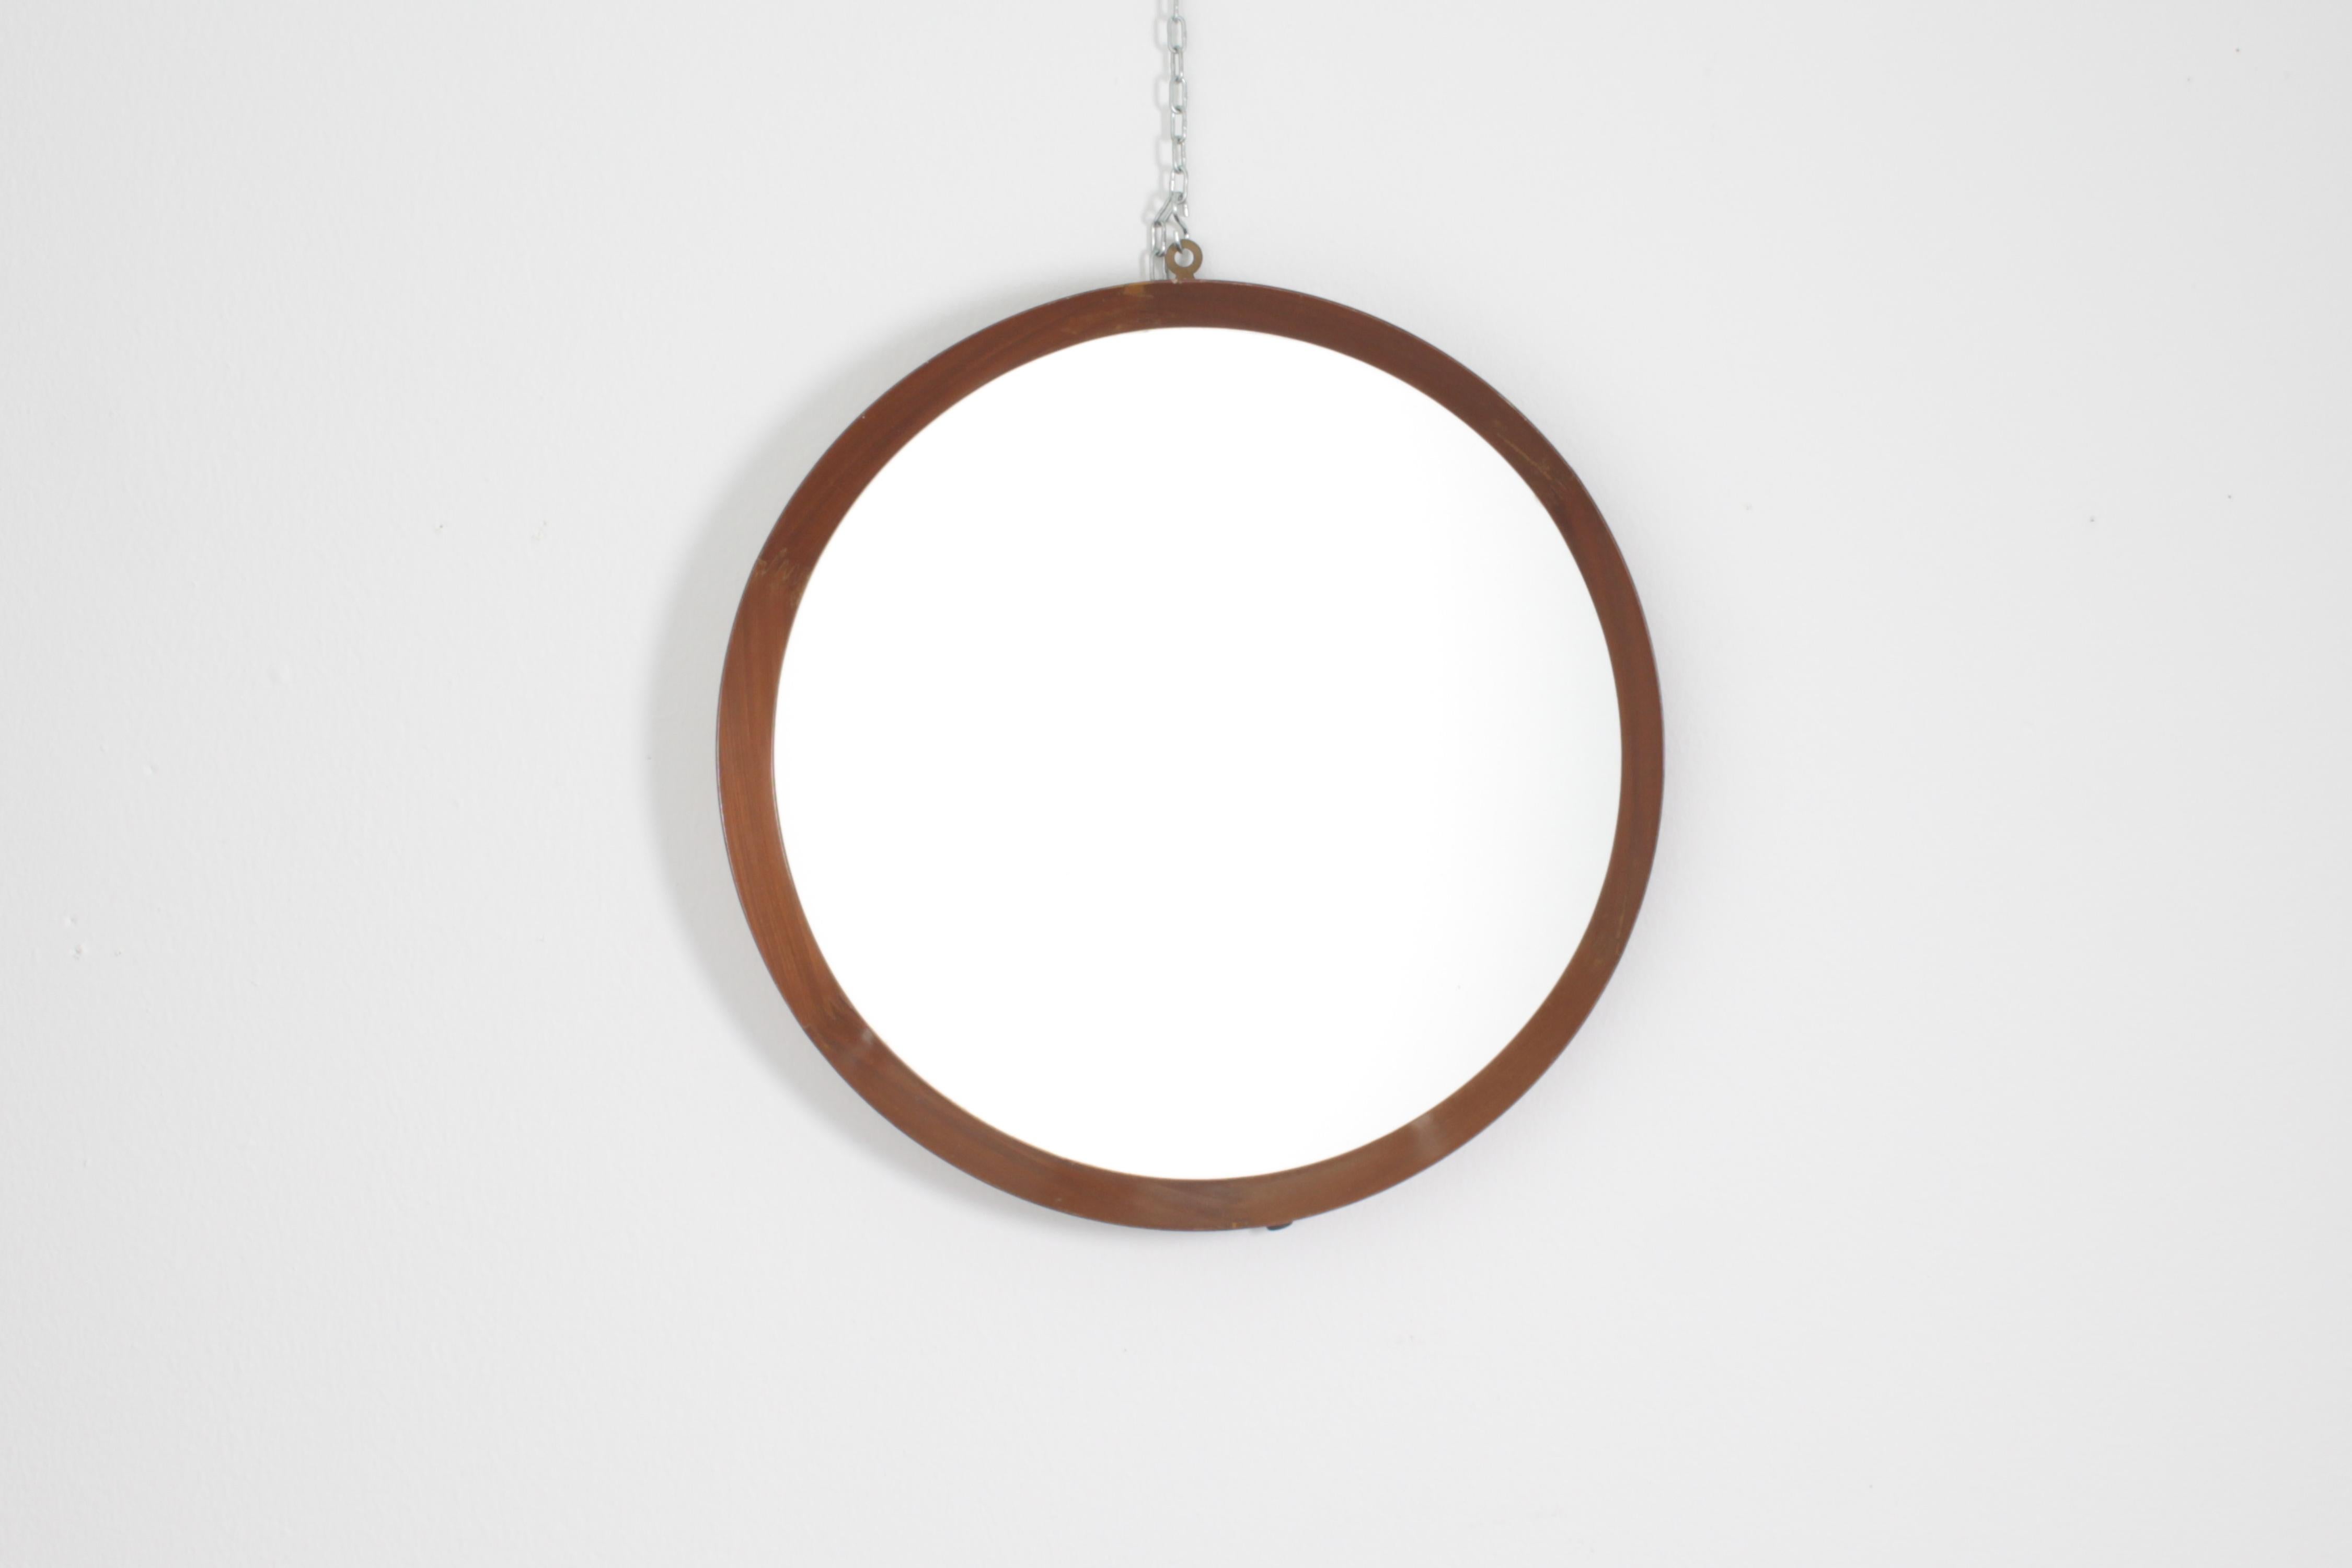 Circular wall mirror with protruding curved wooden frame. Elegant Italian production from the 60s.
Wear consistent with age and use.